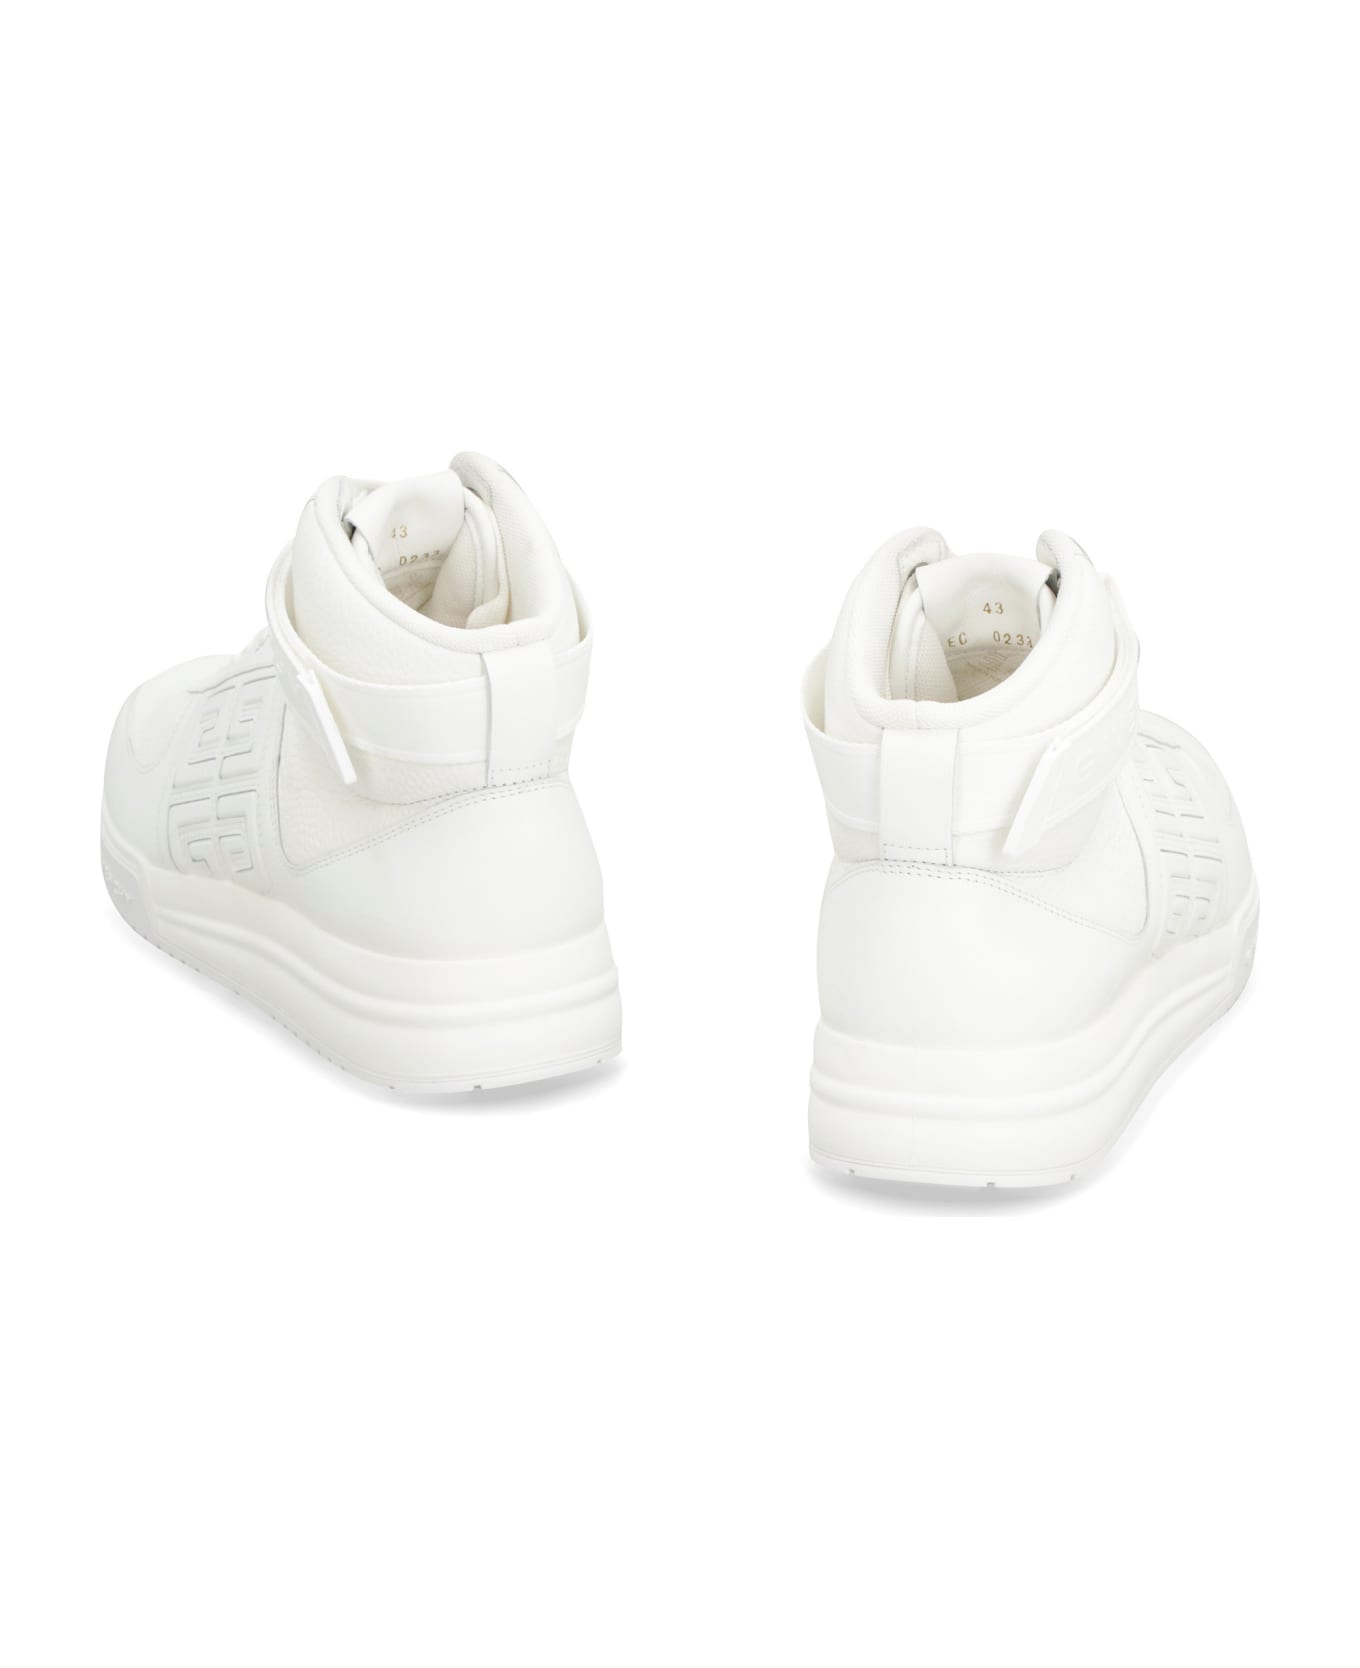 Givenchy G4 Sneakers - White スニーカー